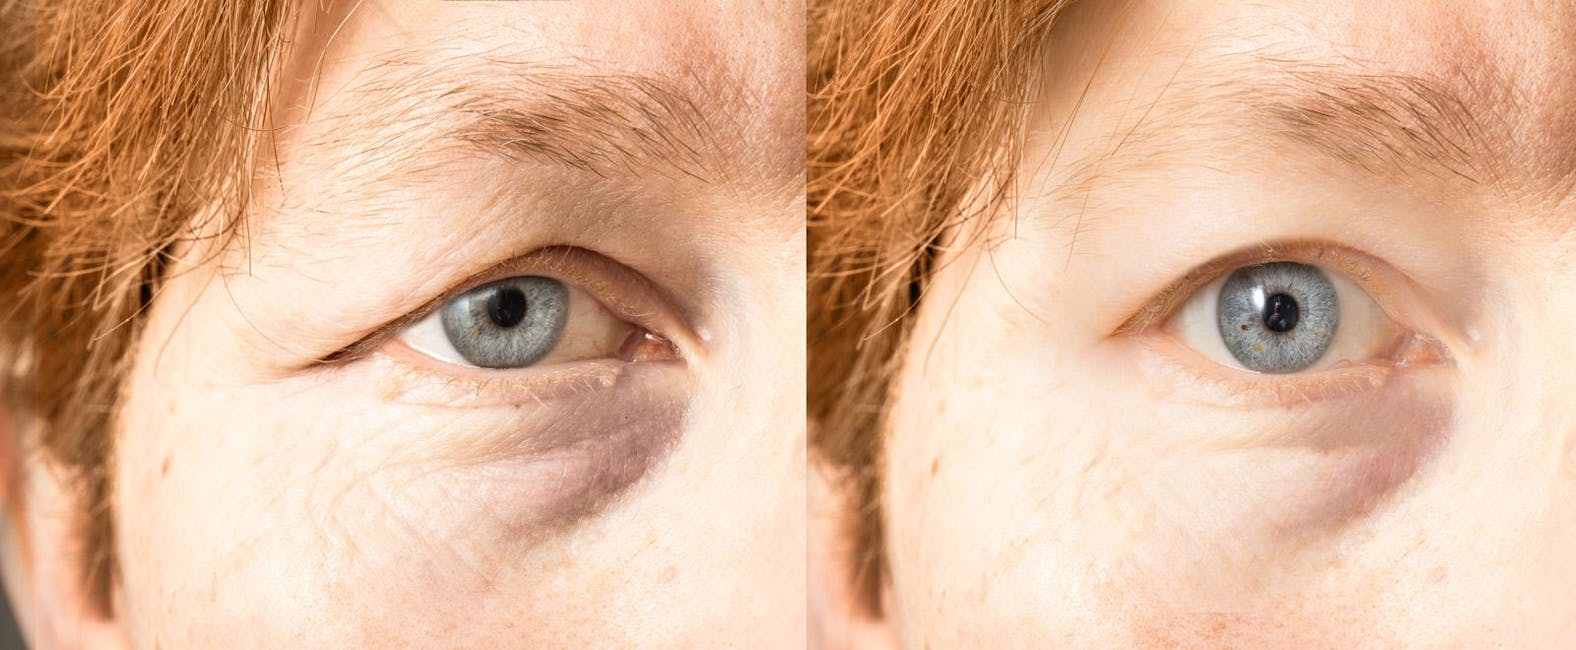 Before & After Results at Arizona Eye Institute & Cosmetic Laser Center | Sin City, AZ, , Facial Plastic Surgeon